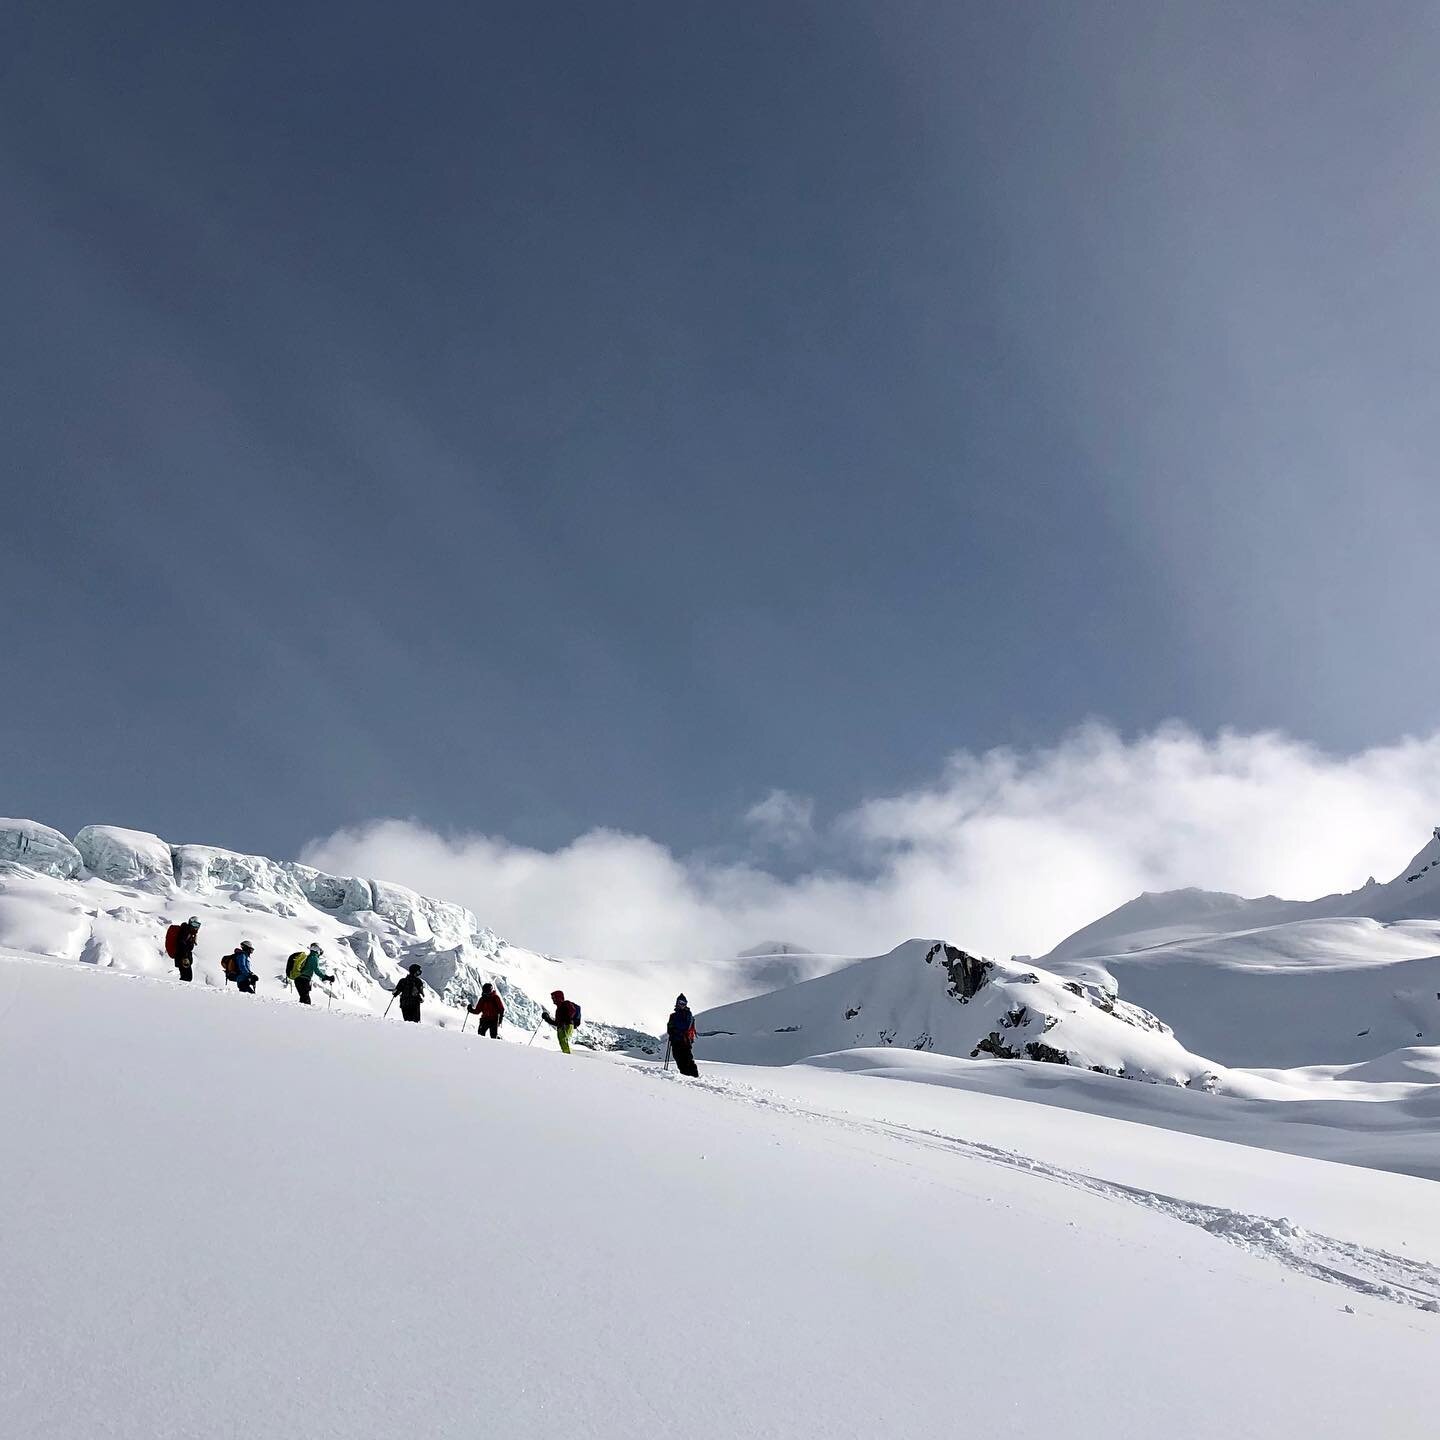 An escape into the mountains with an amazing group of women! If you haven&rsquo;t checked out #snowfalllodge add it to your bucket list! Check out icefall.ca for details. 

#snowfalllodge #skitouring #skibc #skicanada #womensskiweek #selkirkmountains